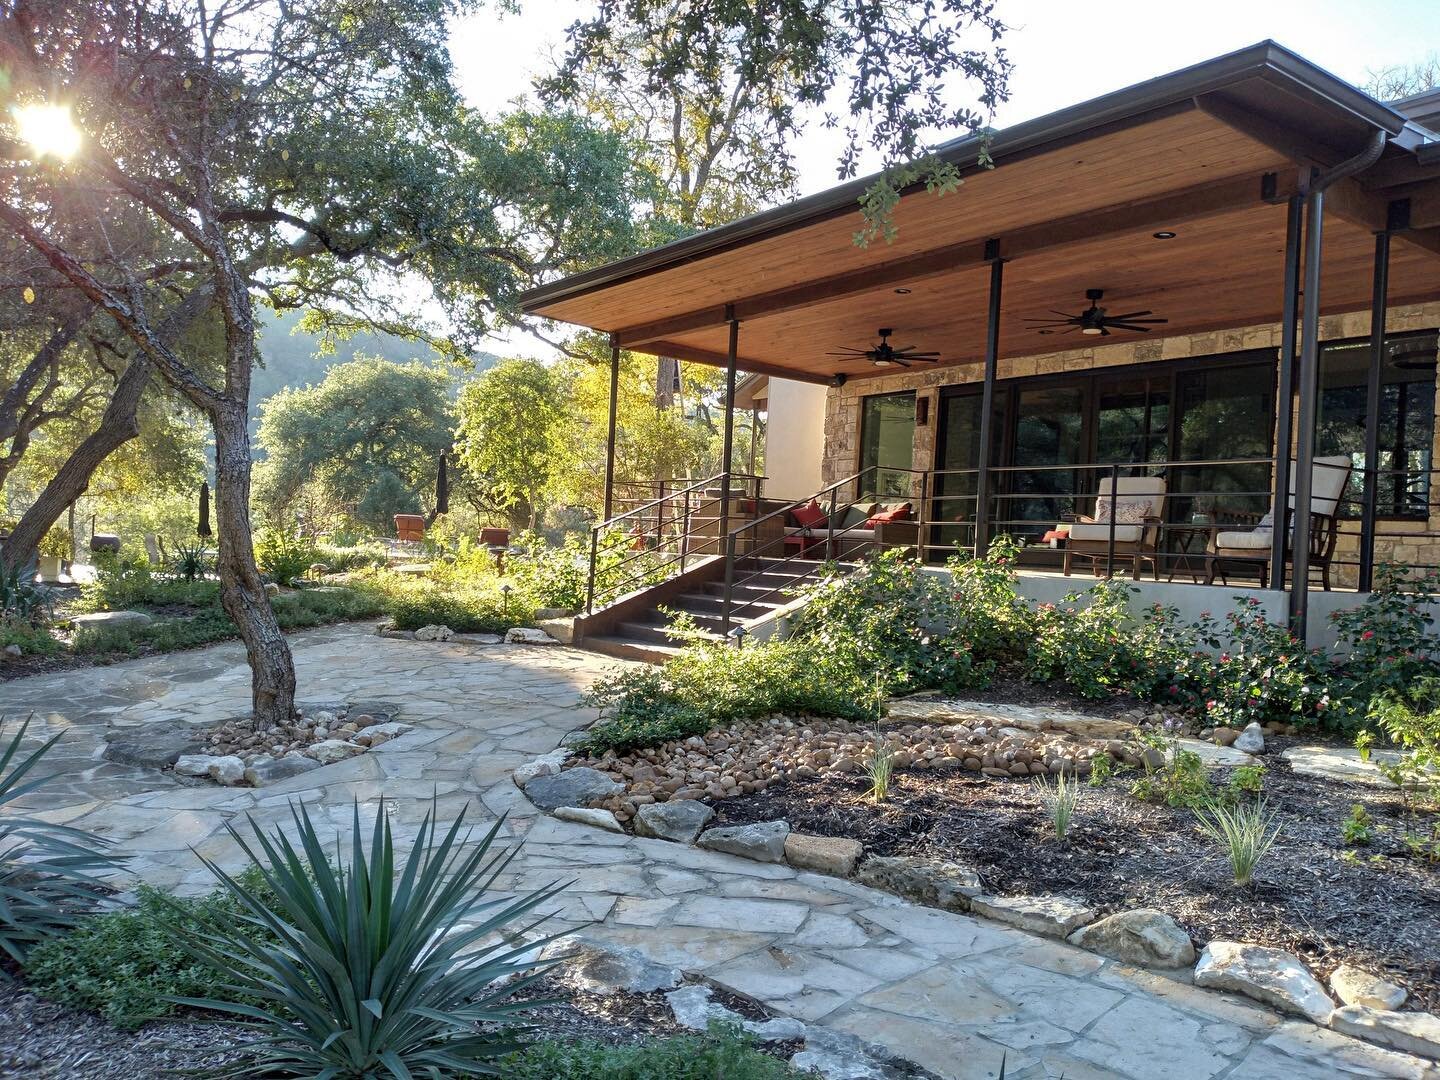 An oldie but a goodie 

#landscapedesign #hillcountry #lush #outdoorliving